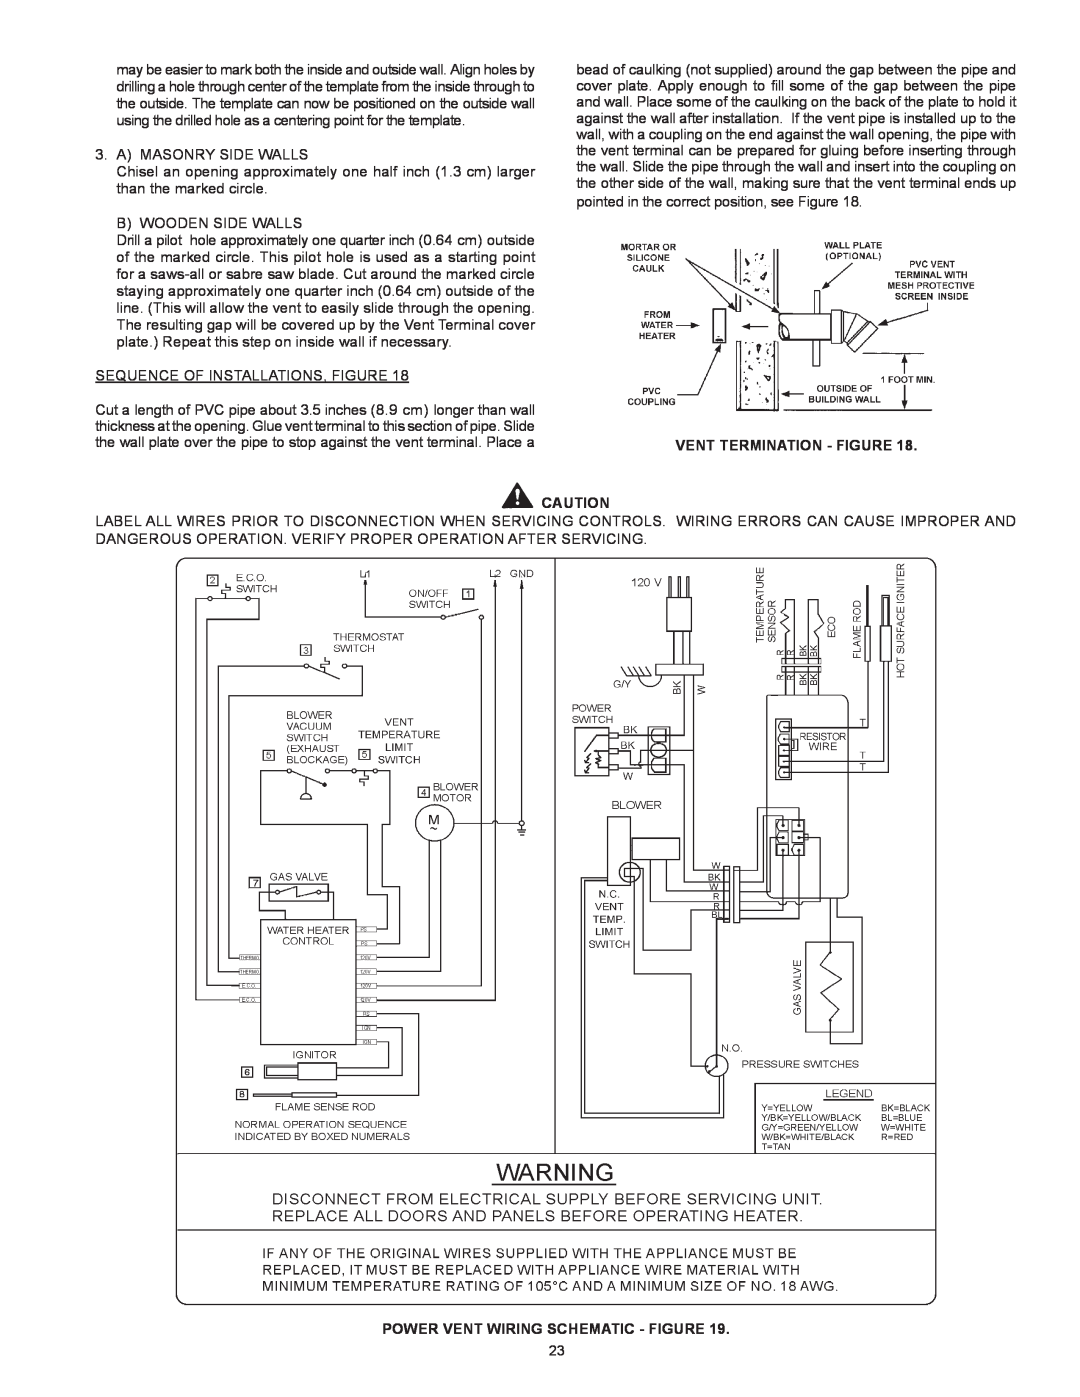 Reliance Water Heaters 317775-000, HE50 76N Series 100 Vent Termination - Figure, Power Vent Wiring Schematic - Figure 